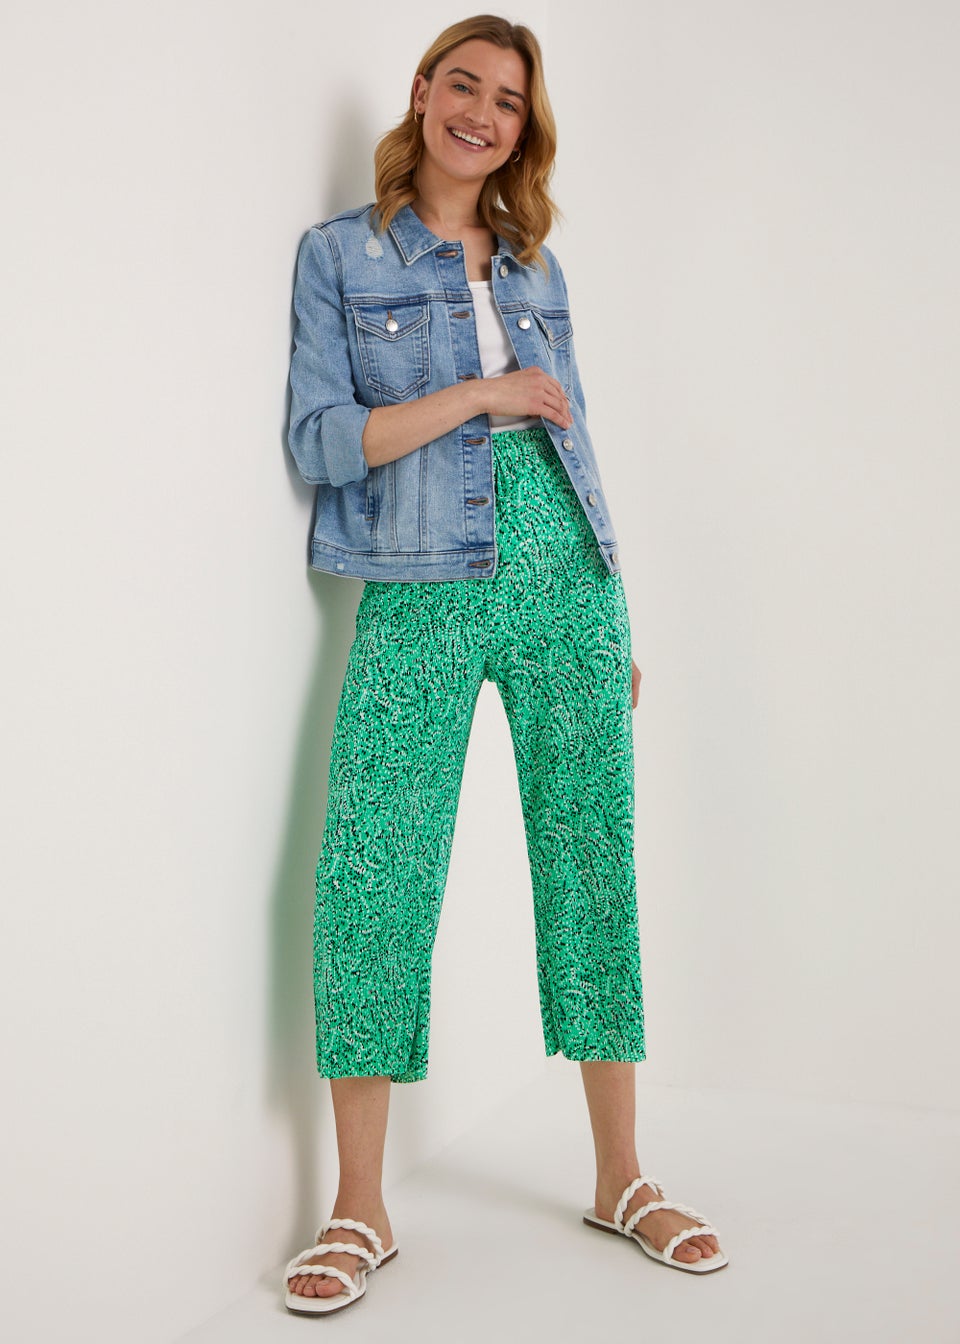 Green Spring Plisse Trousers